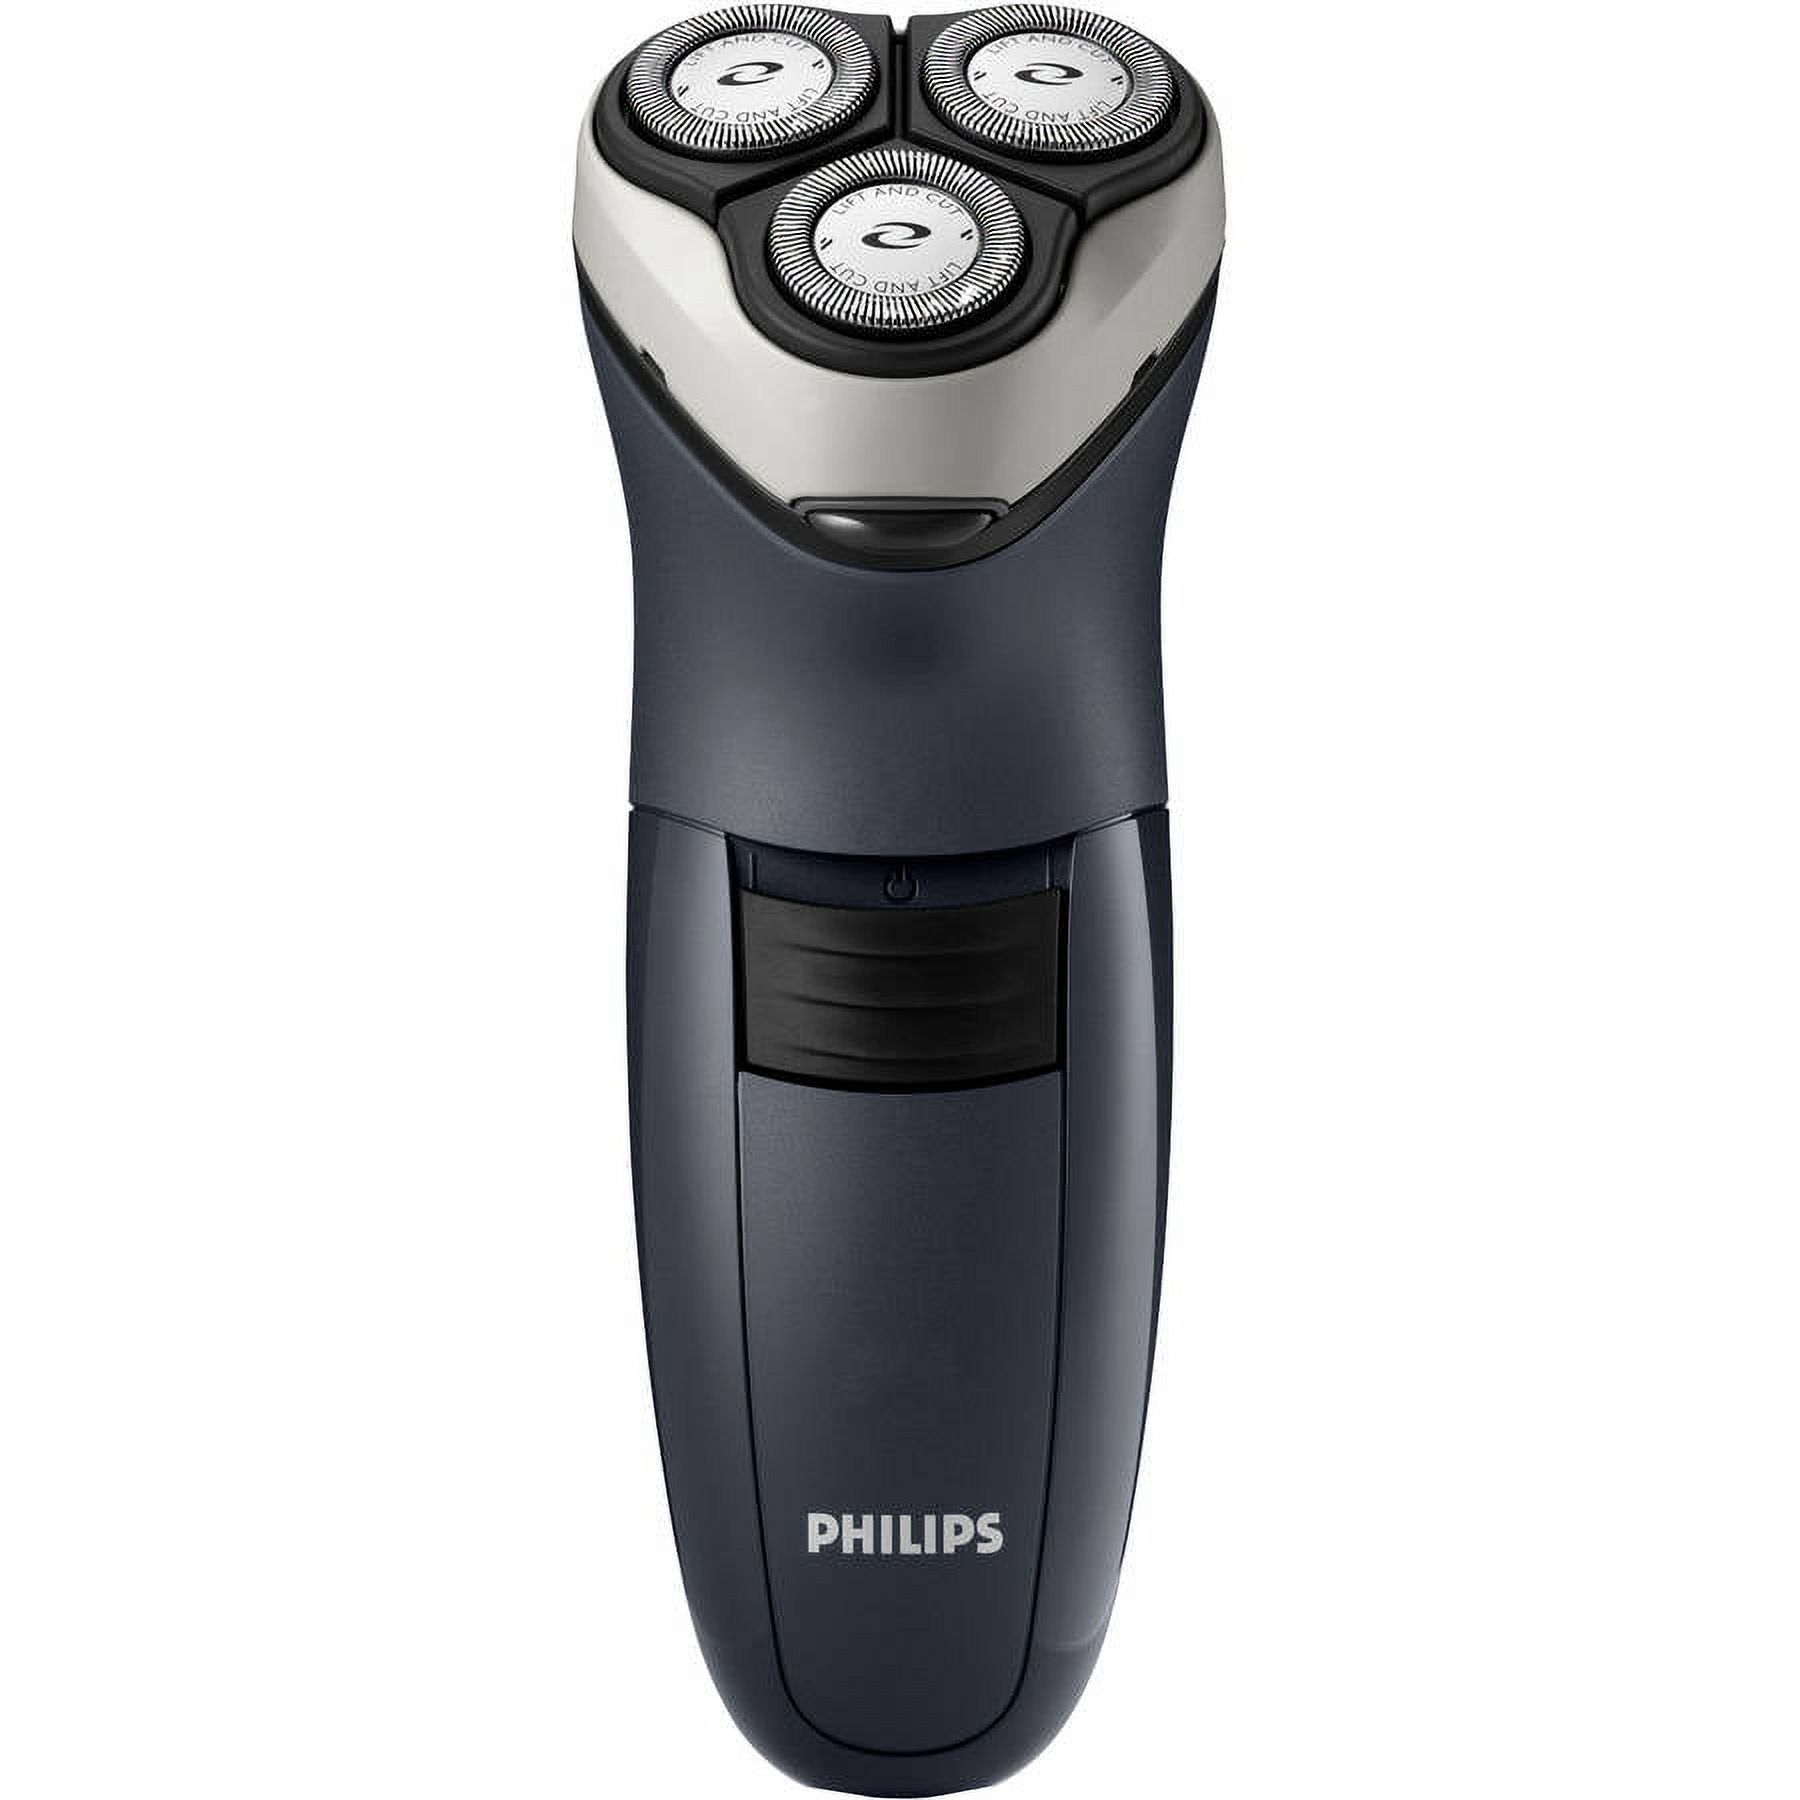 Philips Norelco Electric Shaver 6900 - image 2 of 3